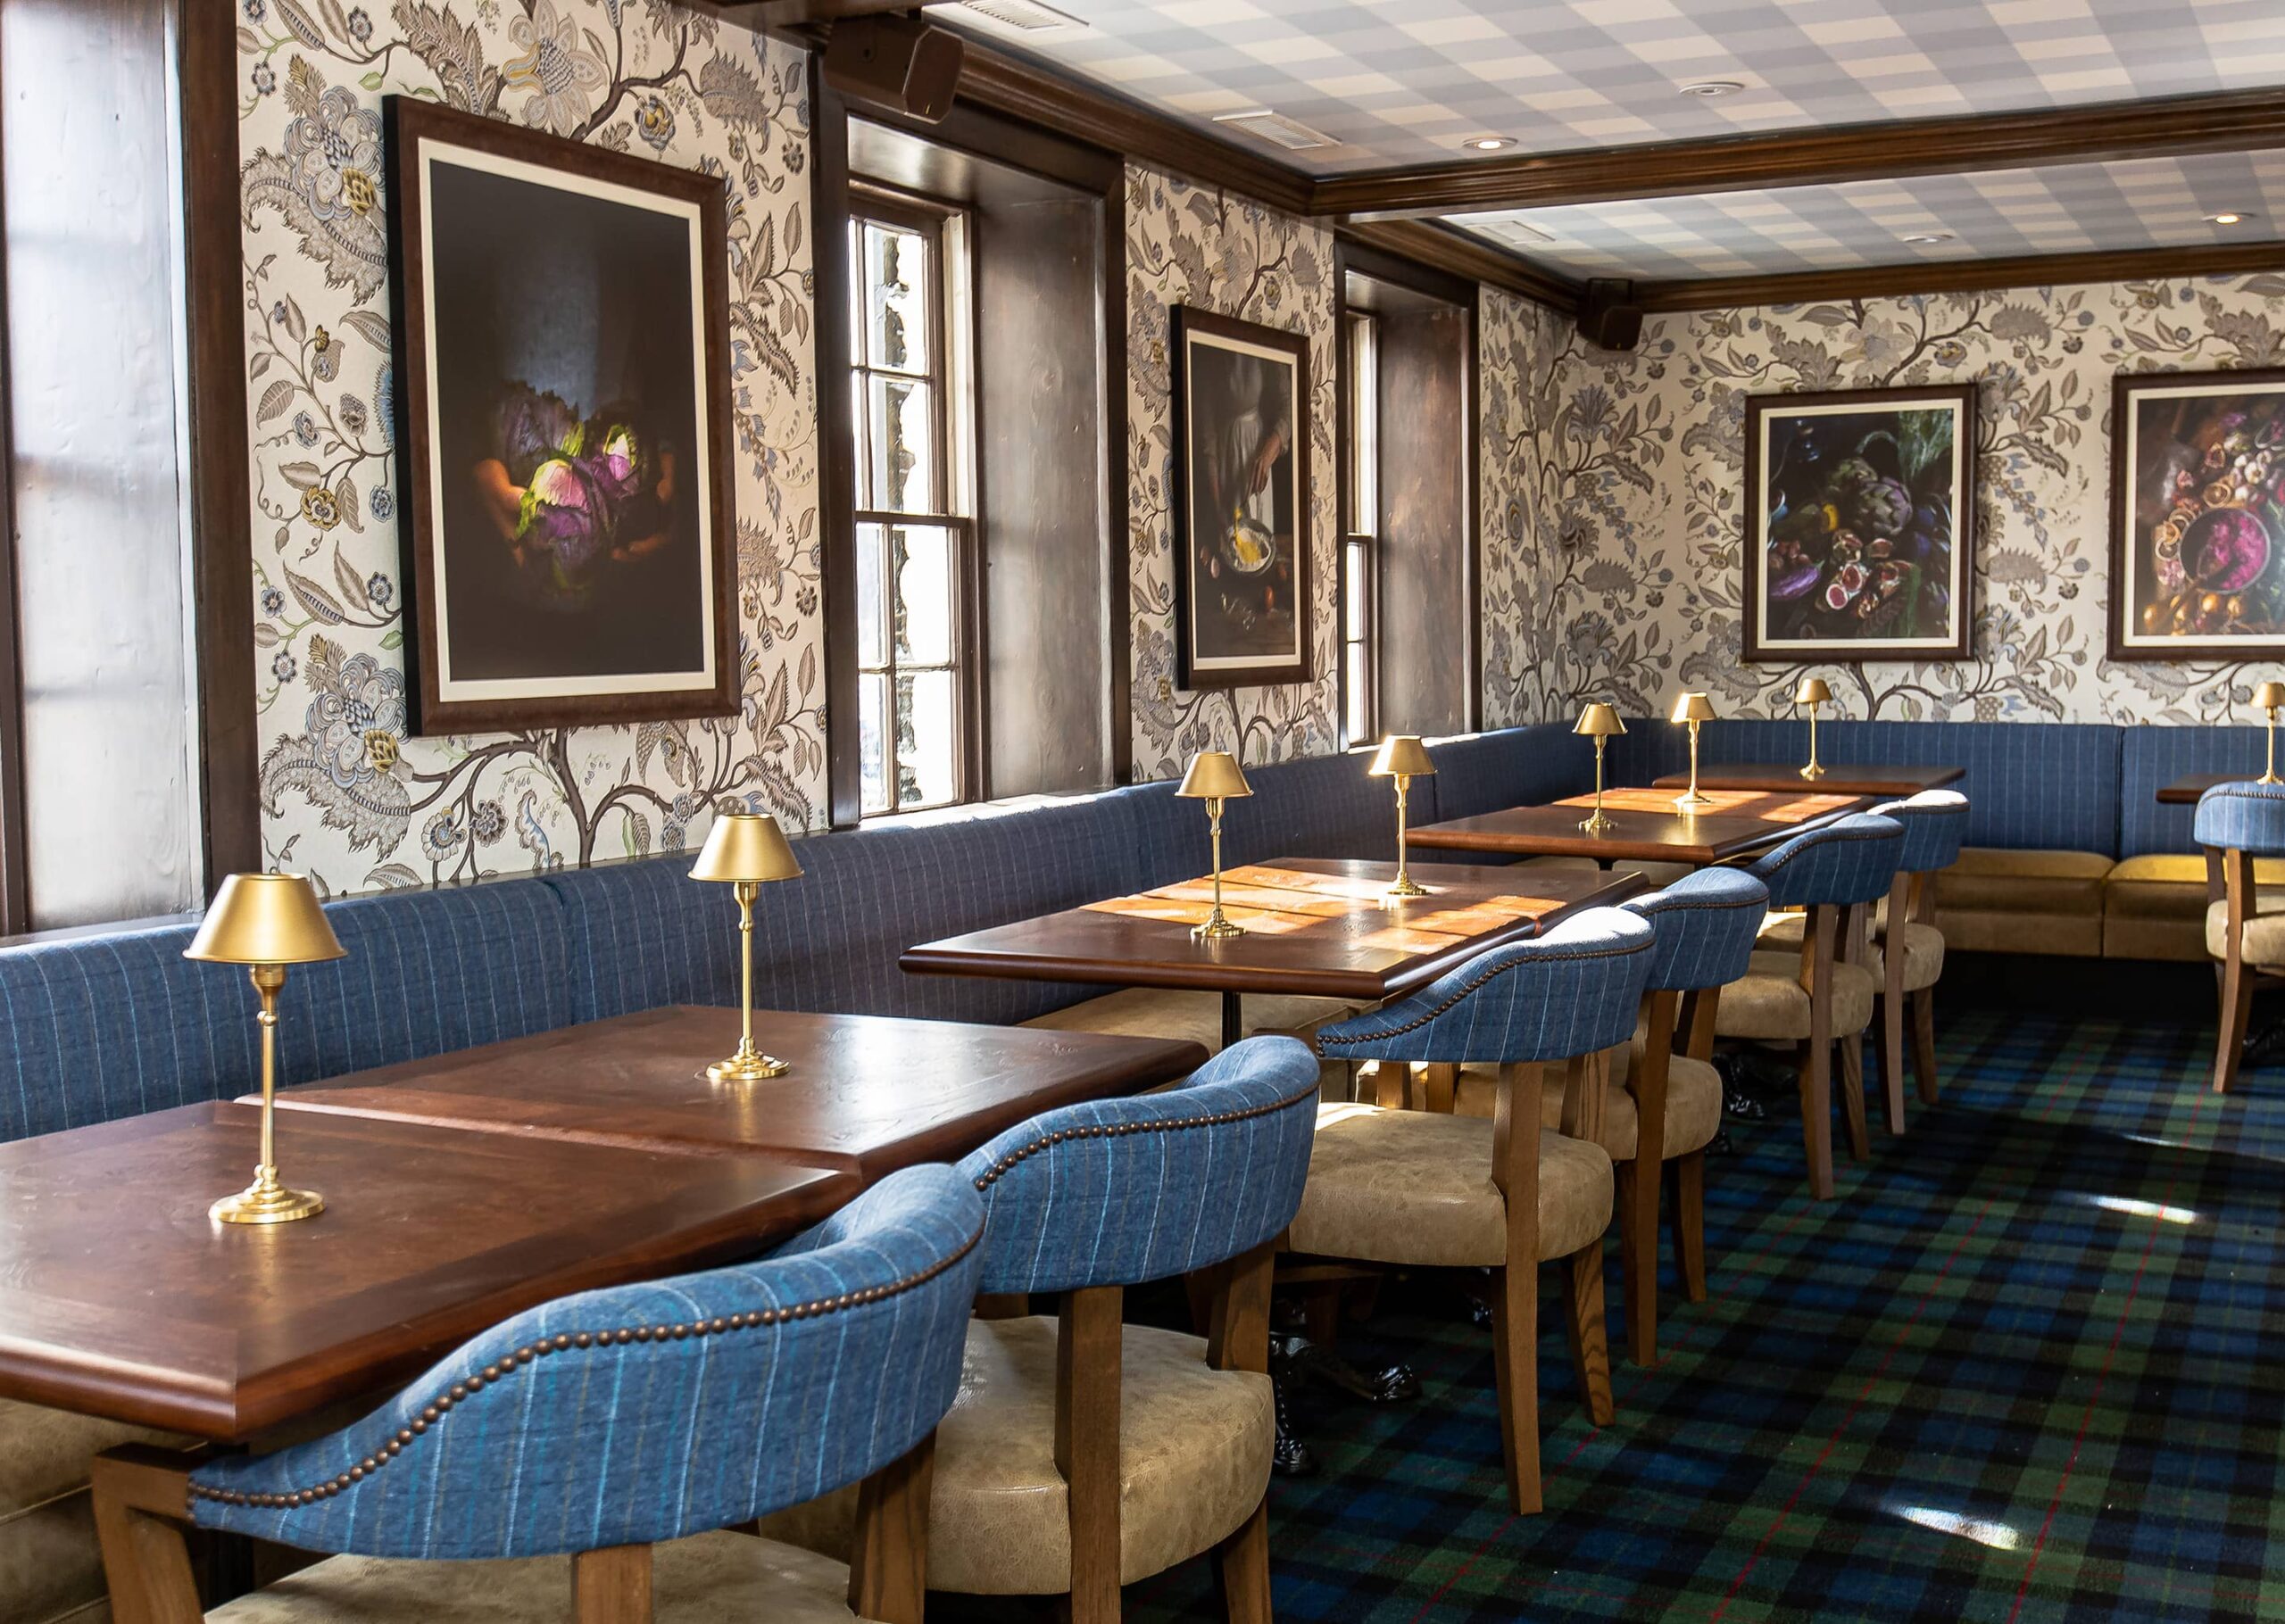 Elegant dining room with floral wallpaper, wooden tables, blue upholstered seating, and wall-mounted lamps.